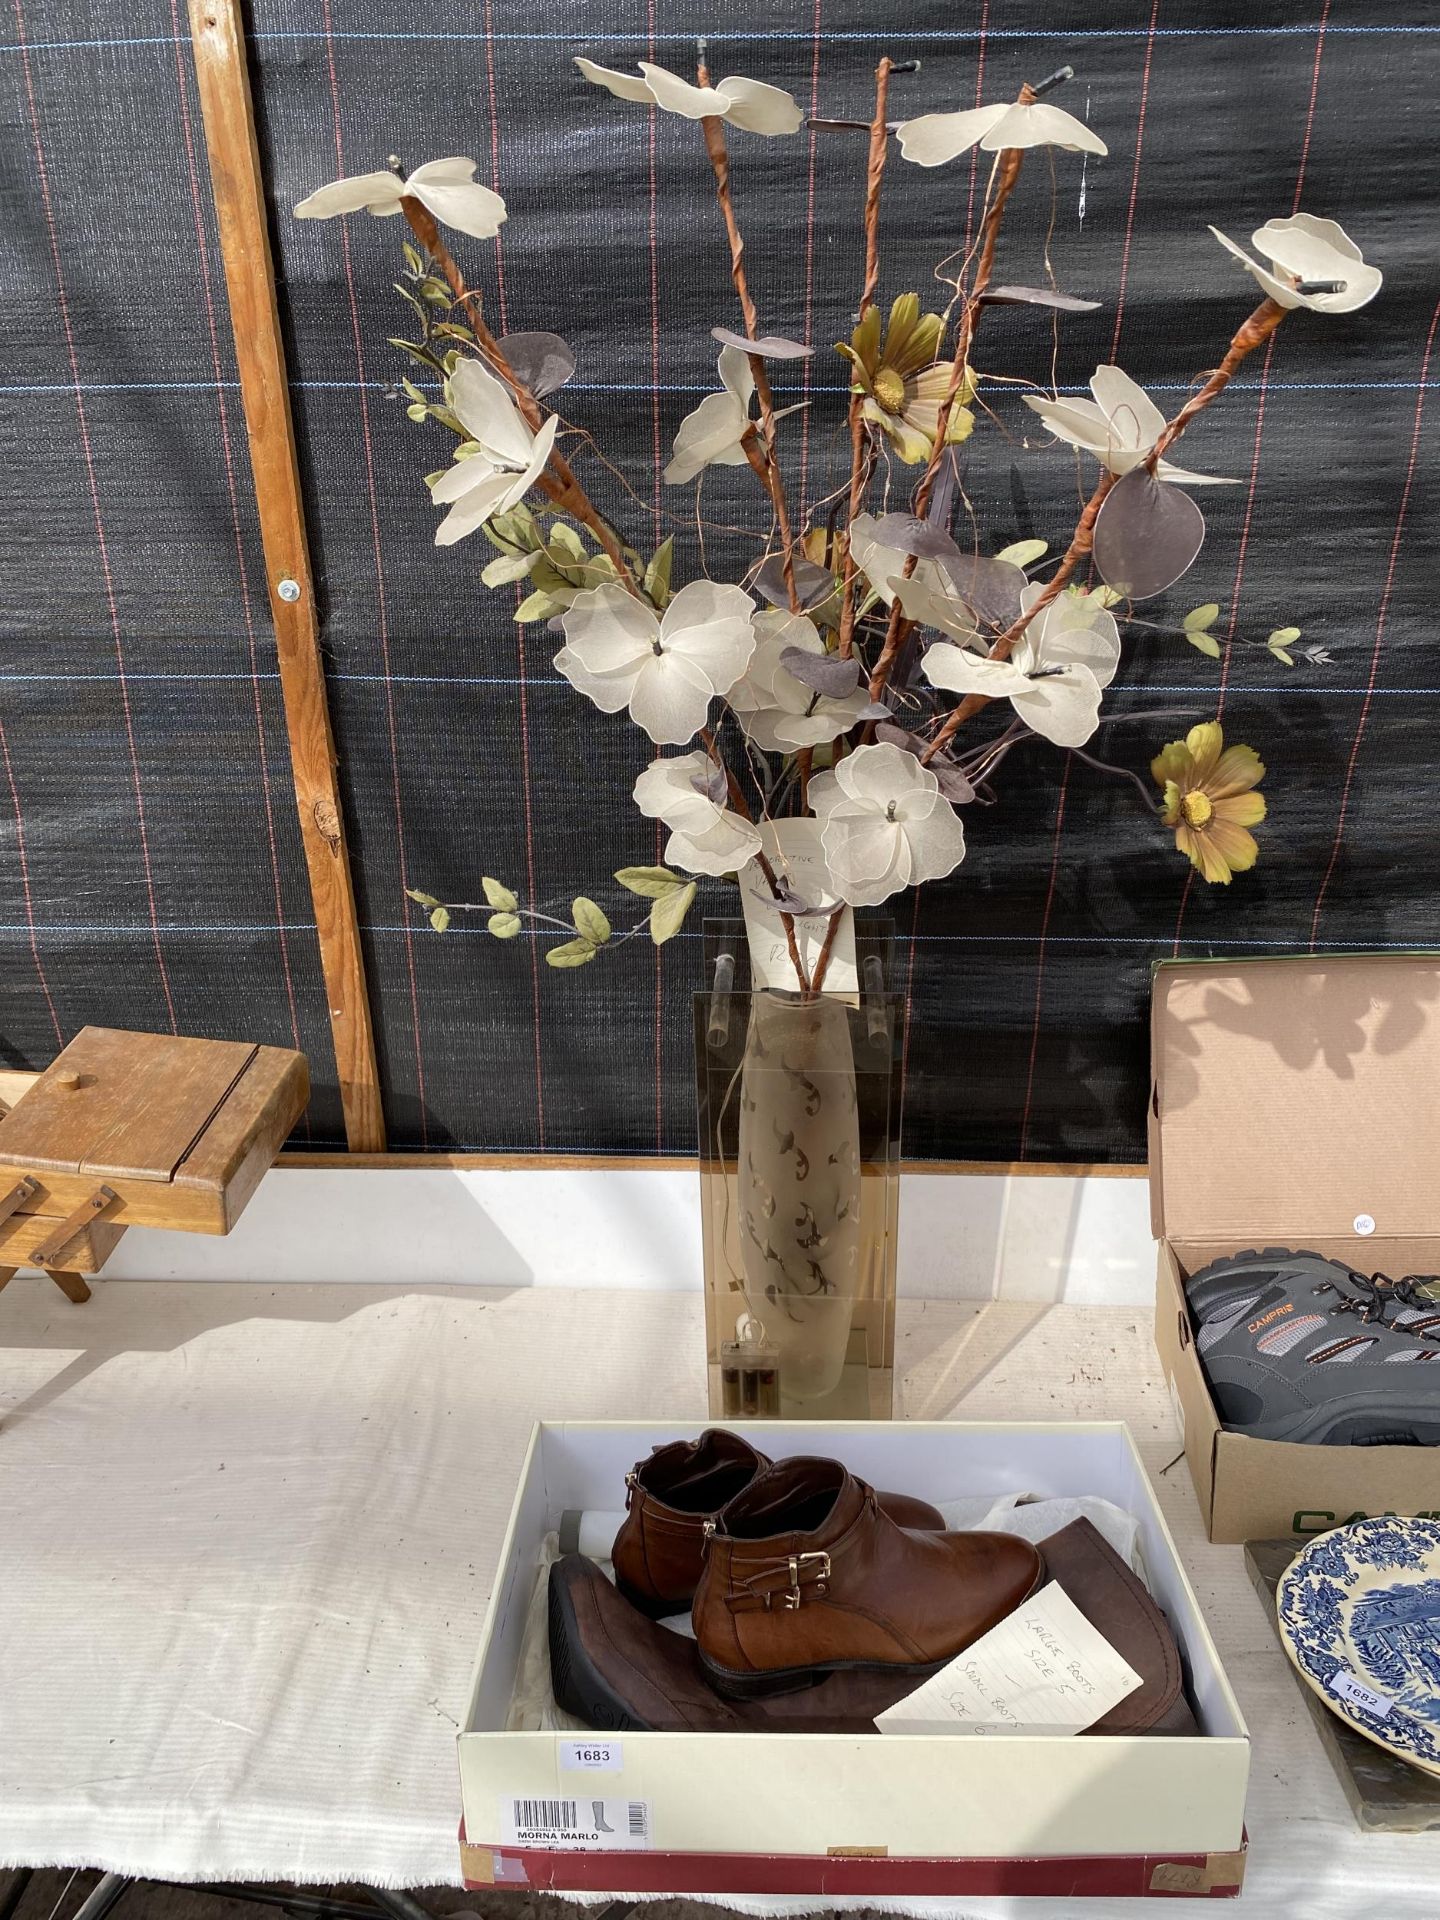 TWO PAIRS OF LADIES BOOTS AND A DECORATIVE GLASS VASE